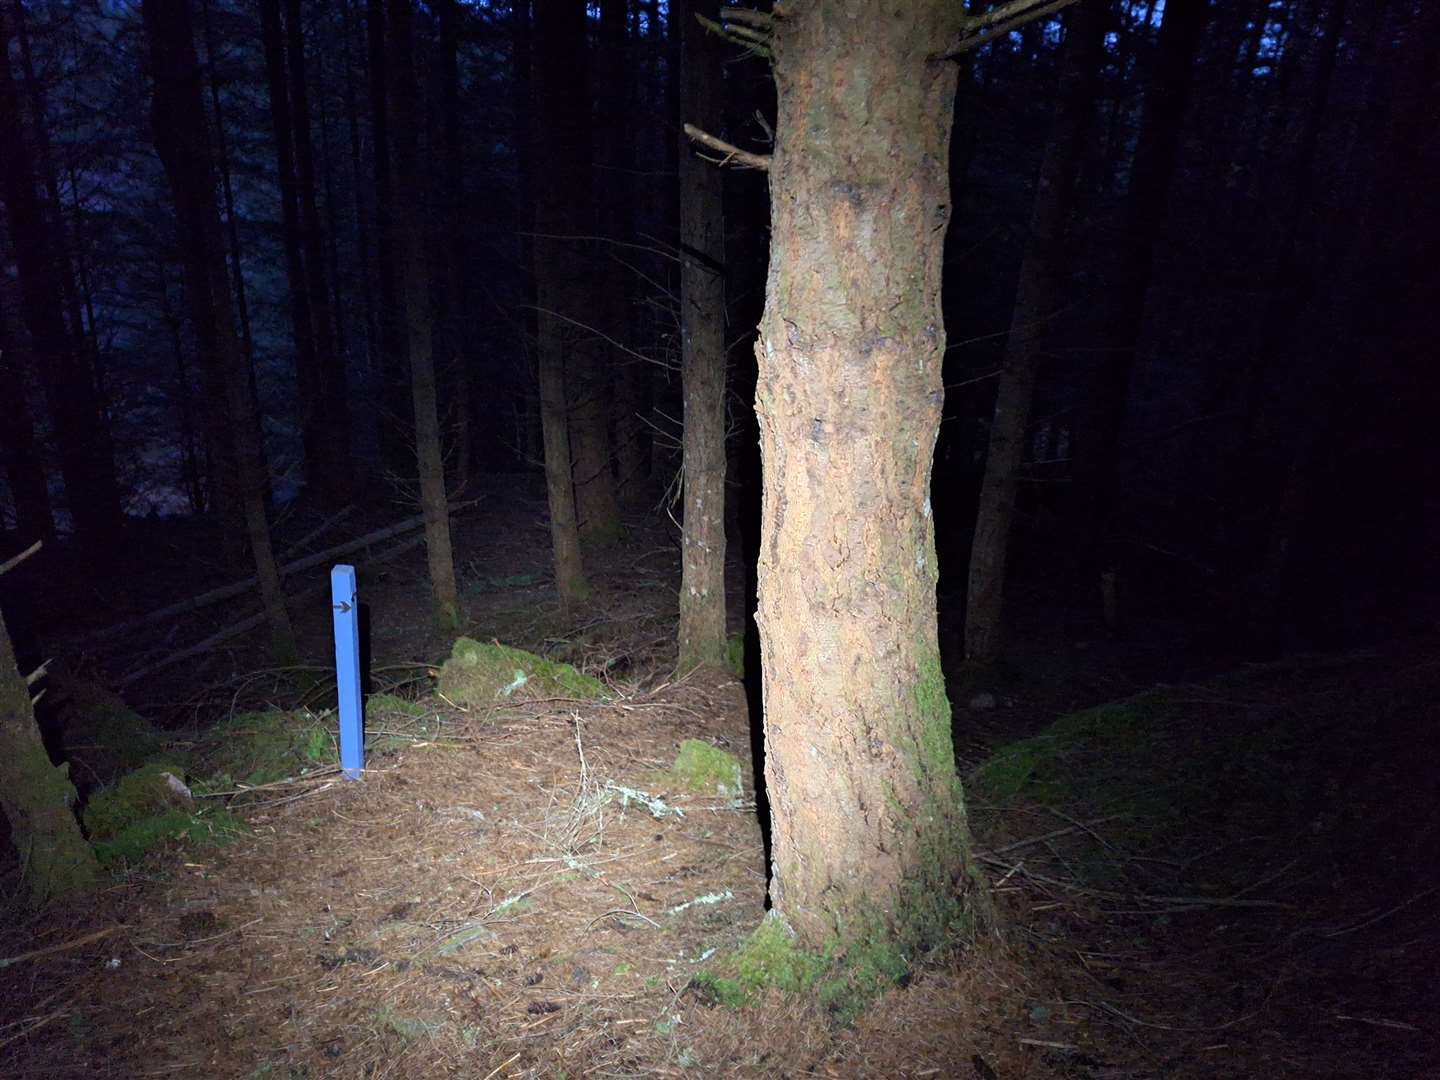 Through a dense section of forest, guided by headtorch and occasional marker posts.